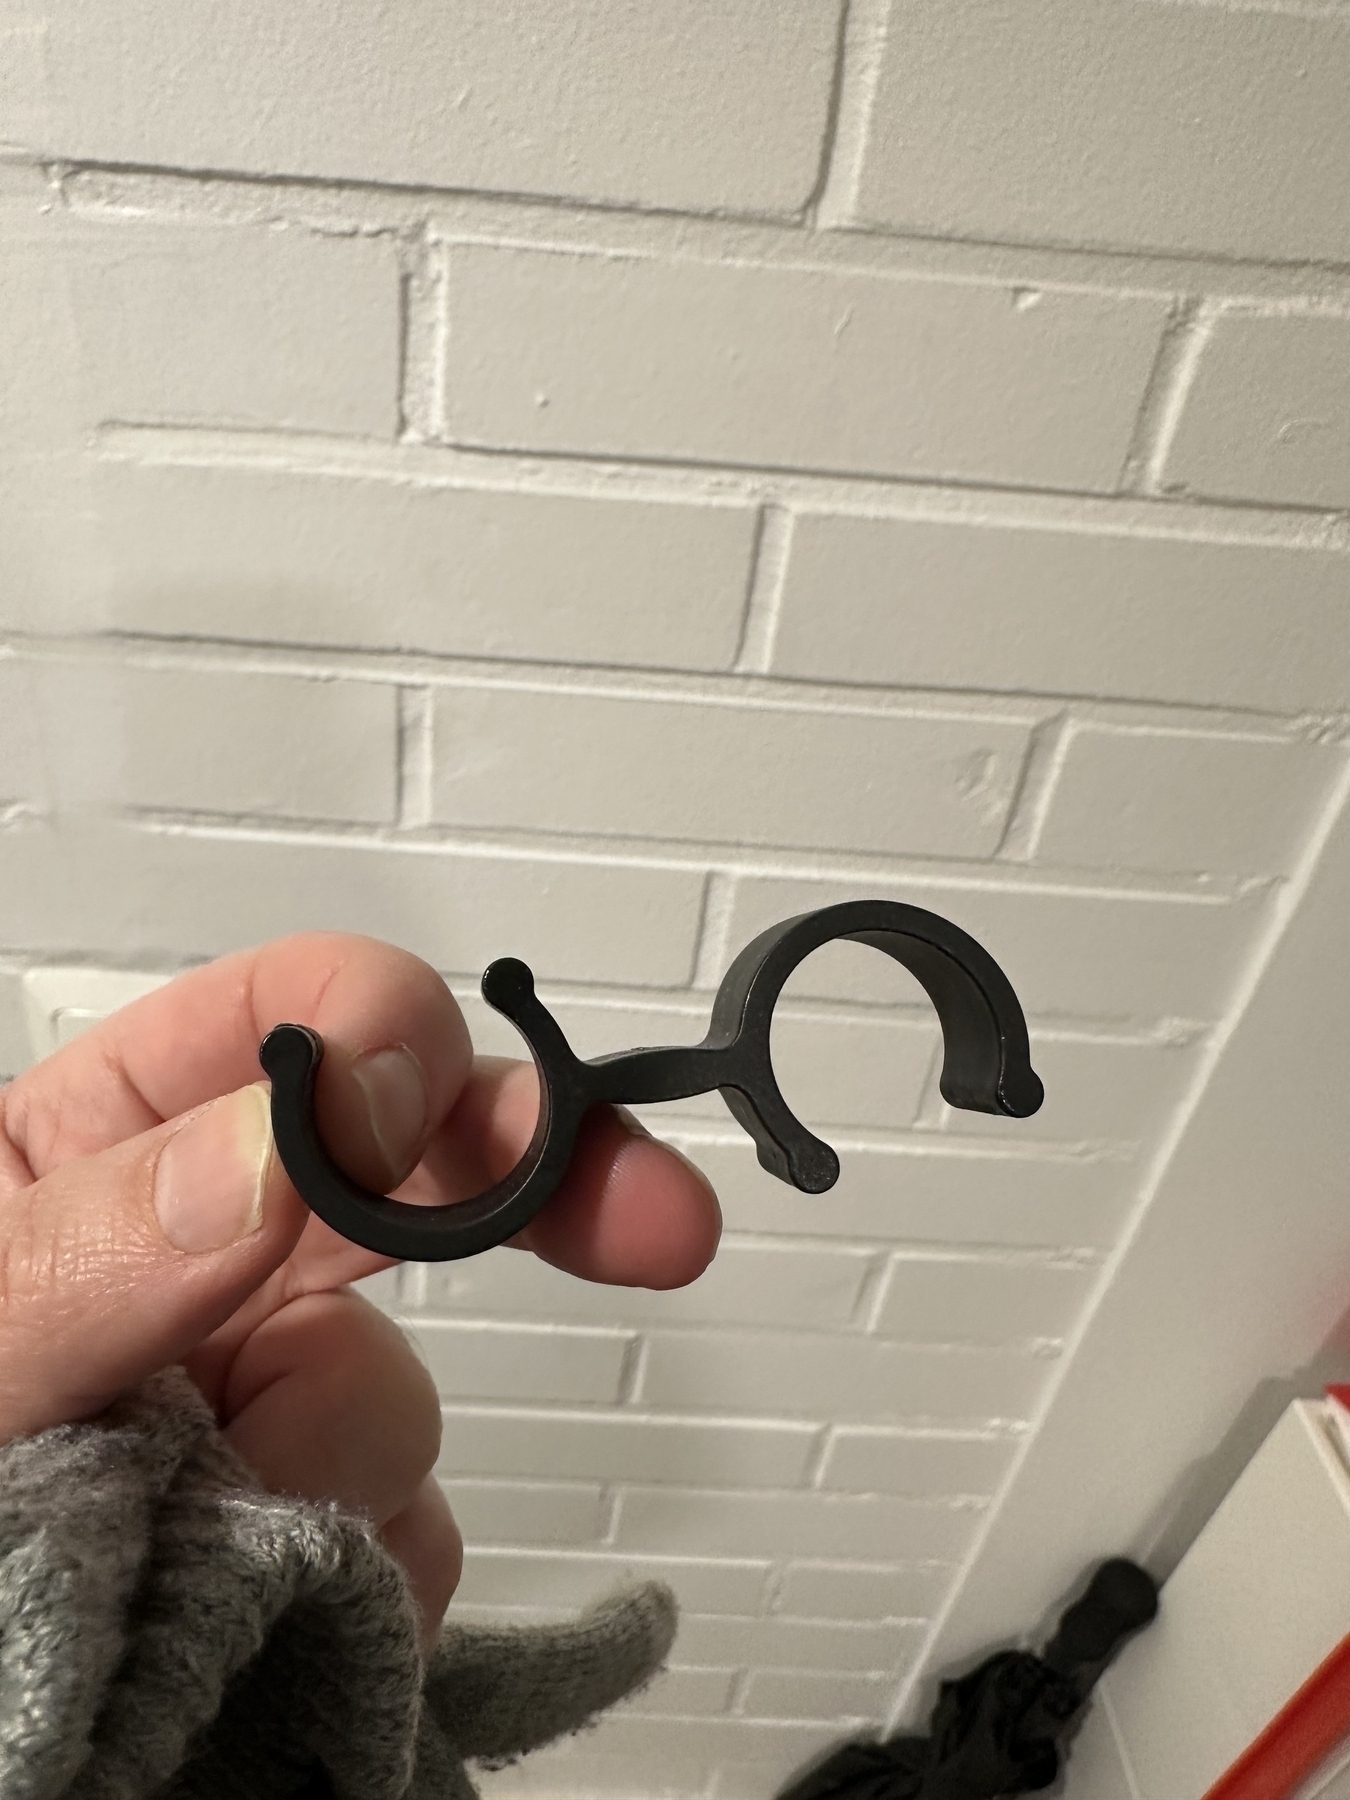 Plastic clip that consists of two plastic arcs that open up into opposing directions and are connected by a straight piece of plastic